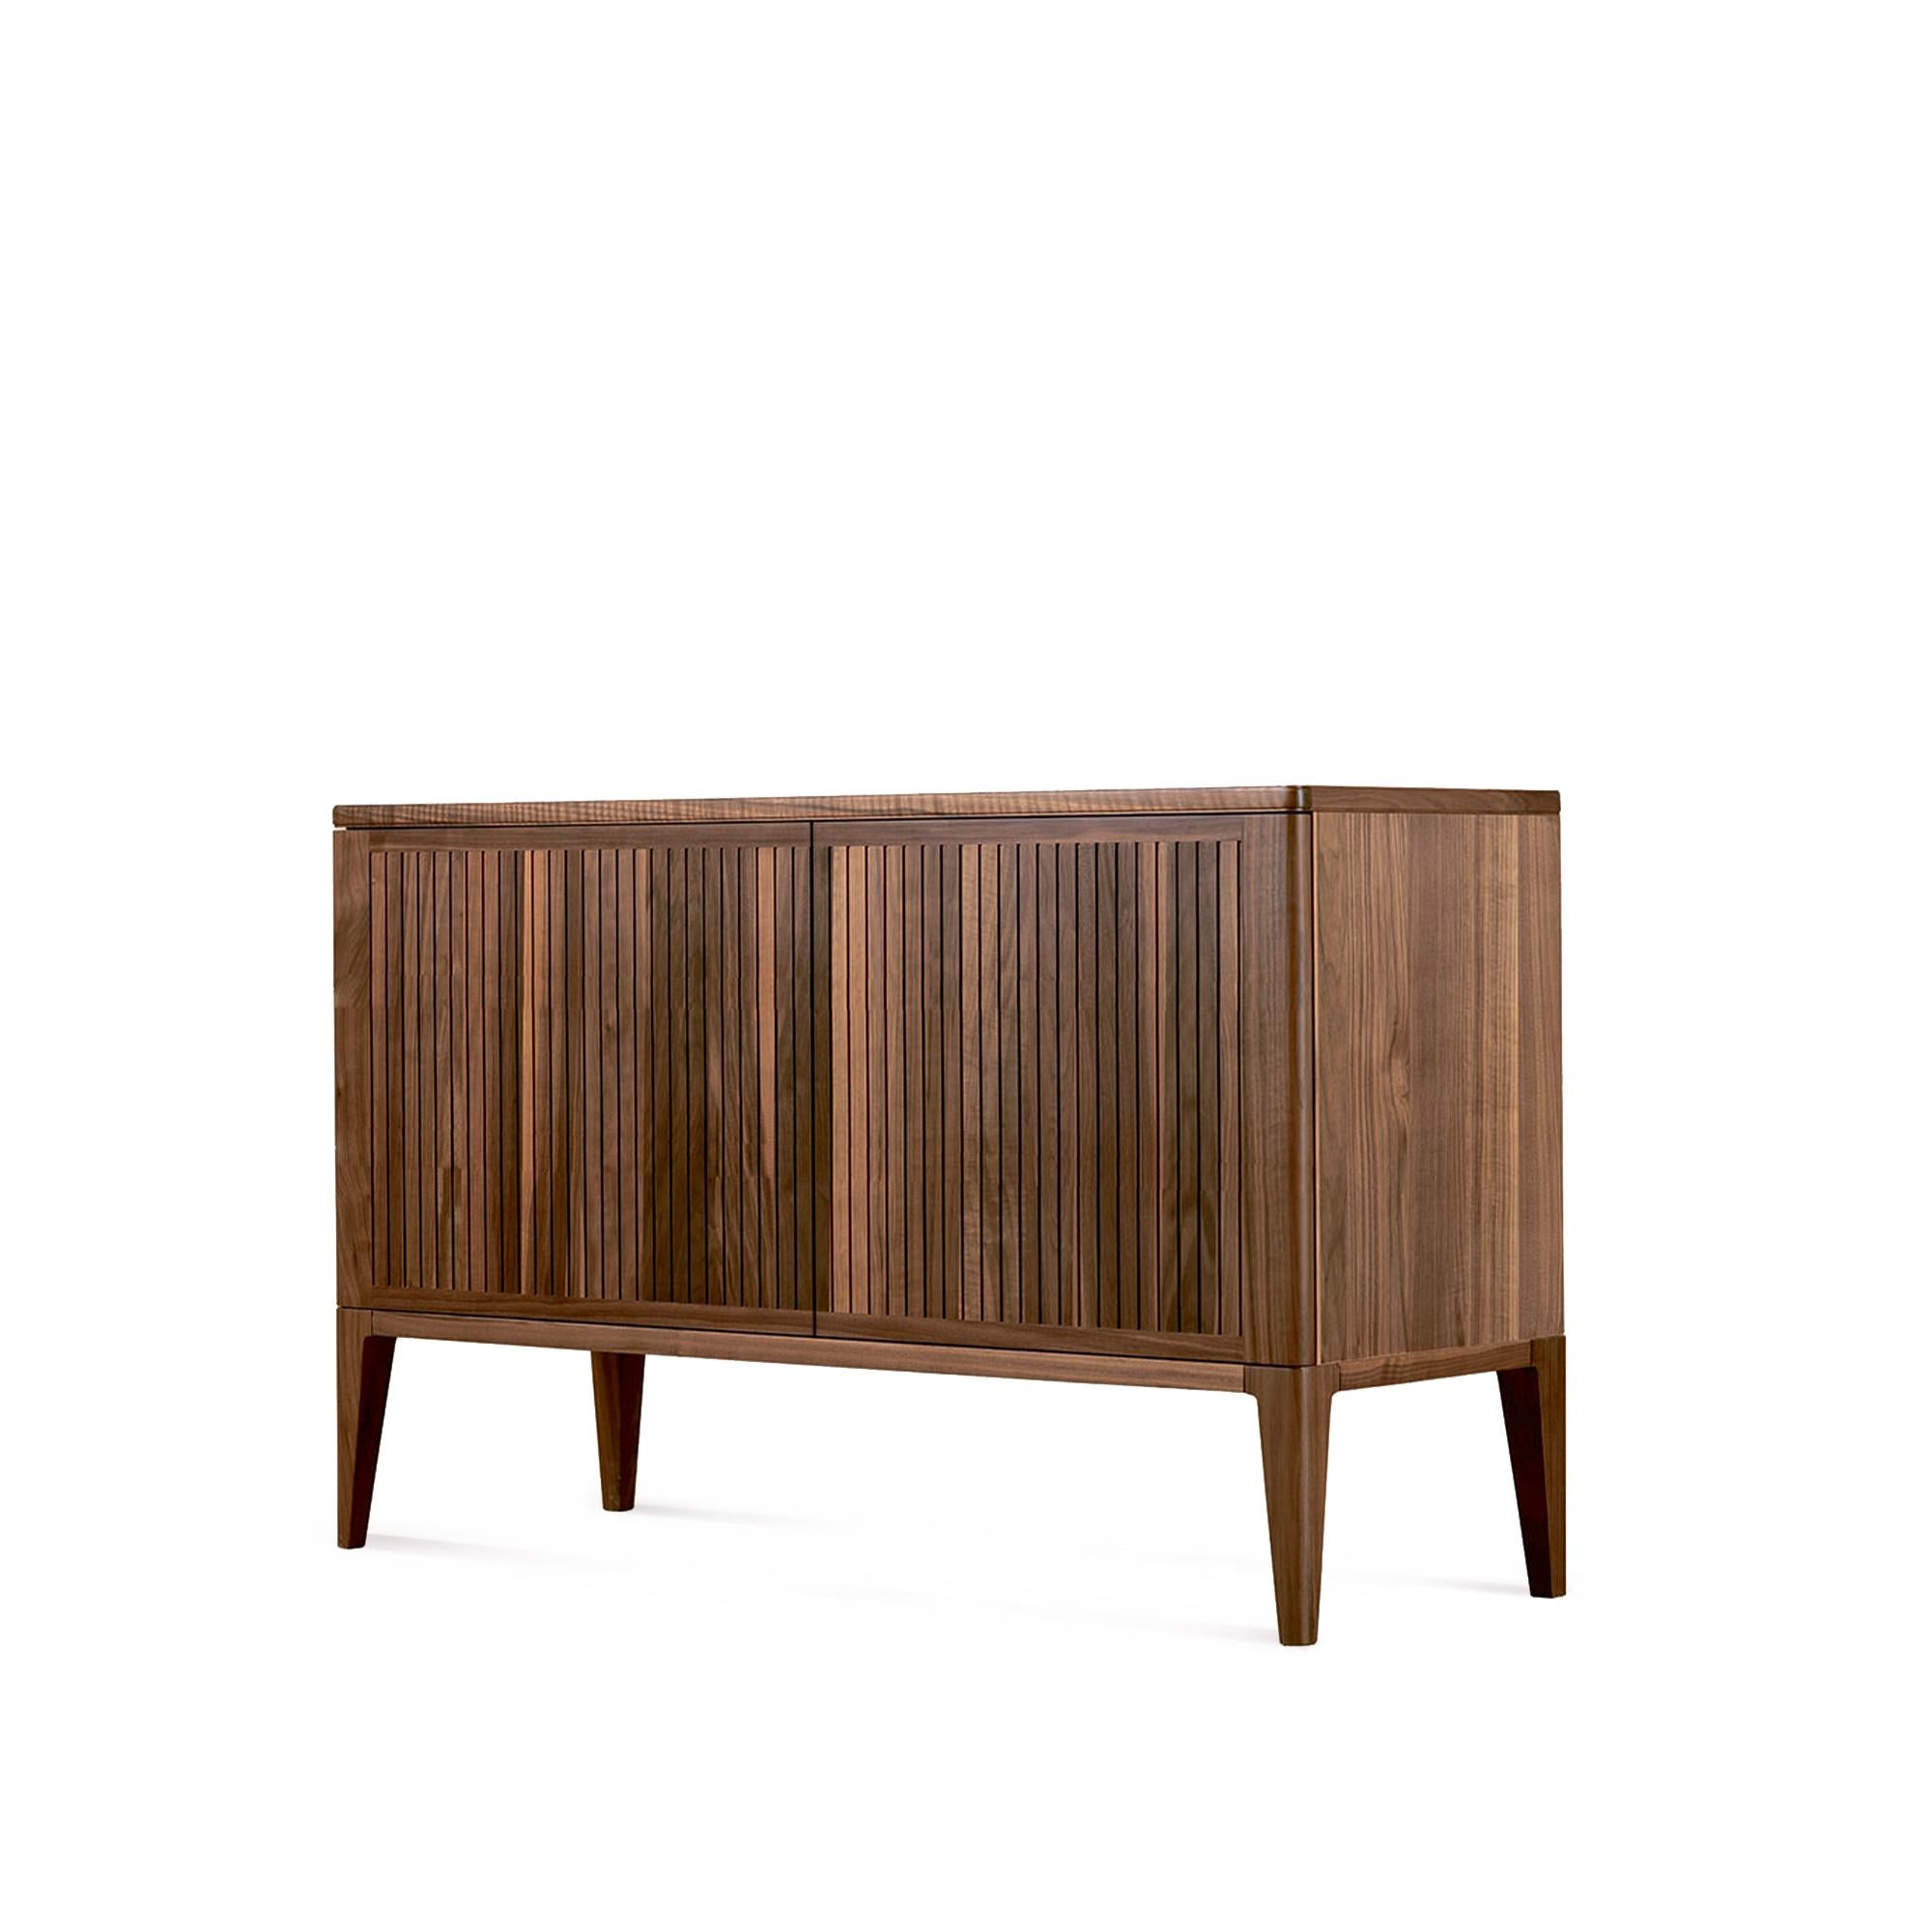 This sideboard is the result of the combination of fine Italian design and superior craftsmanship. The crafted front of the two doors made in premium solid walnut, oil finish, creates a stunning contrast between light and shadows thanks to it’s